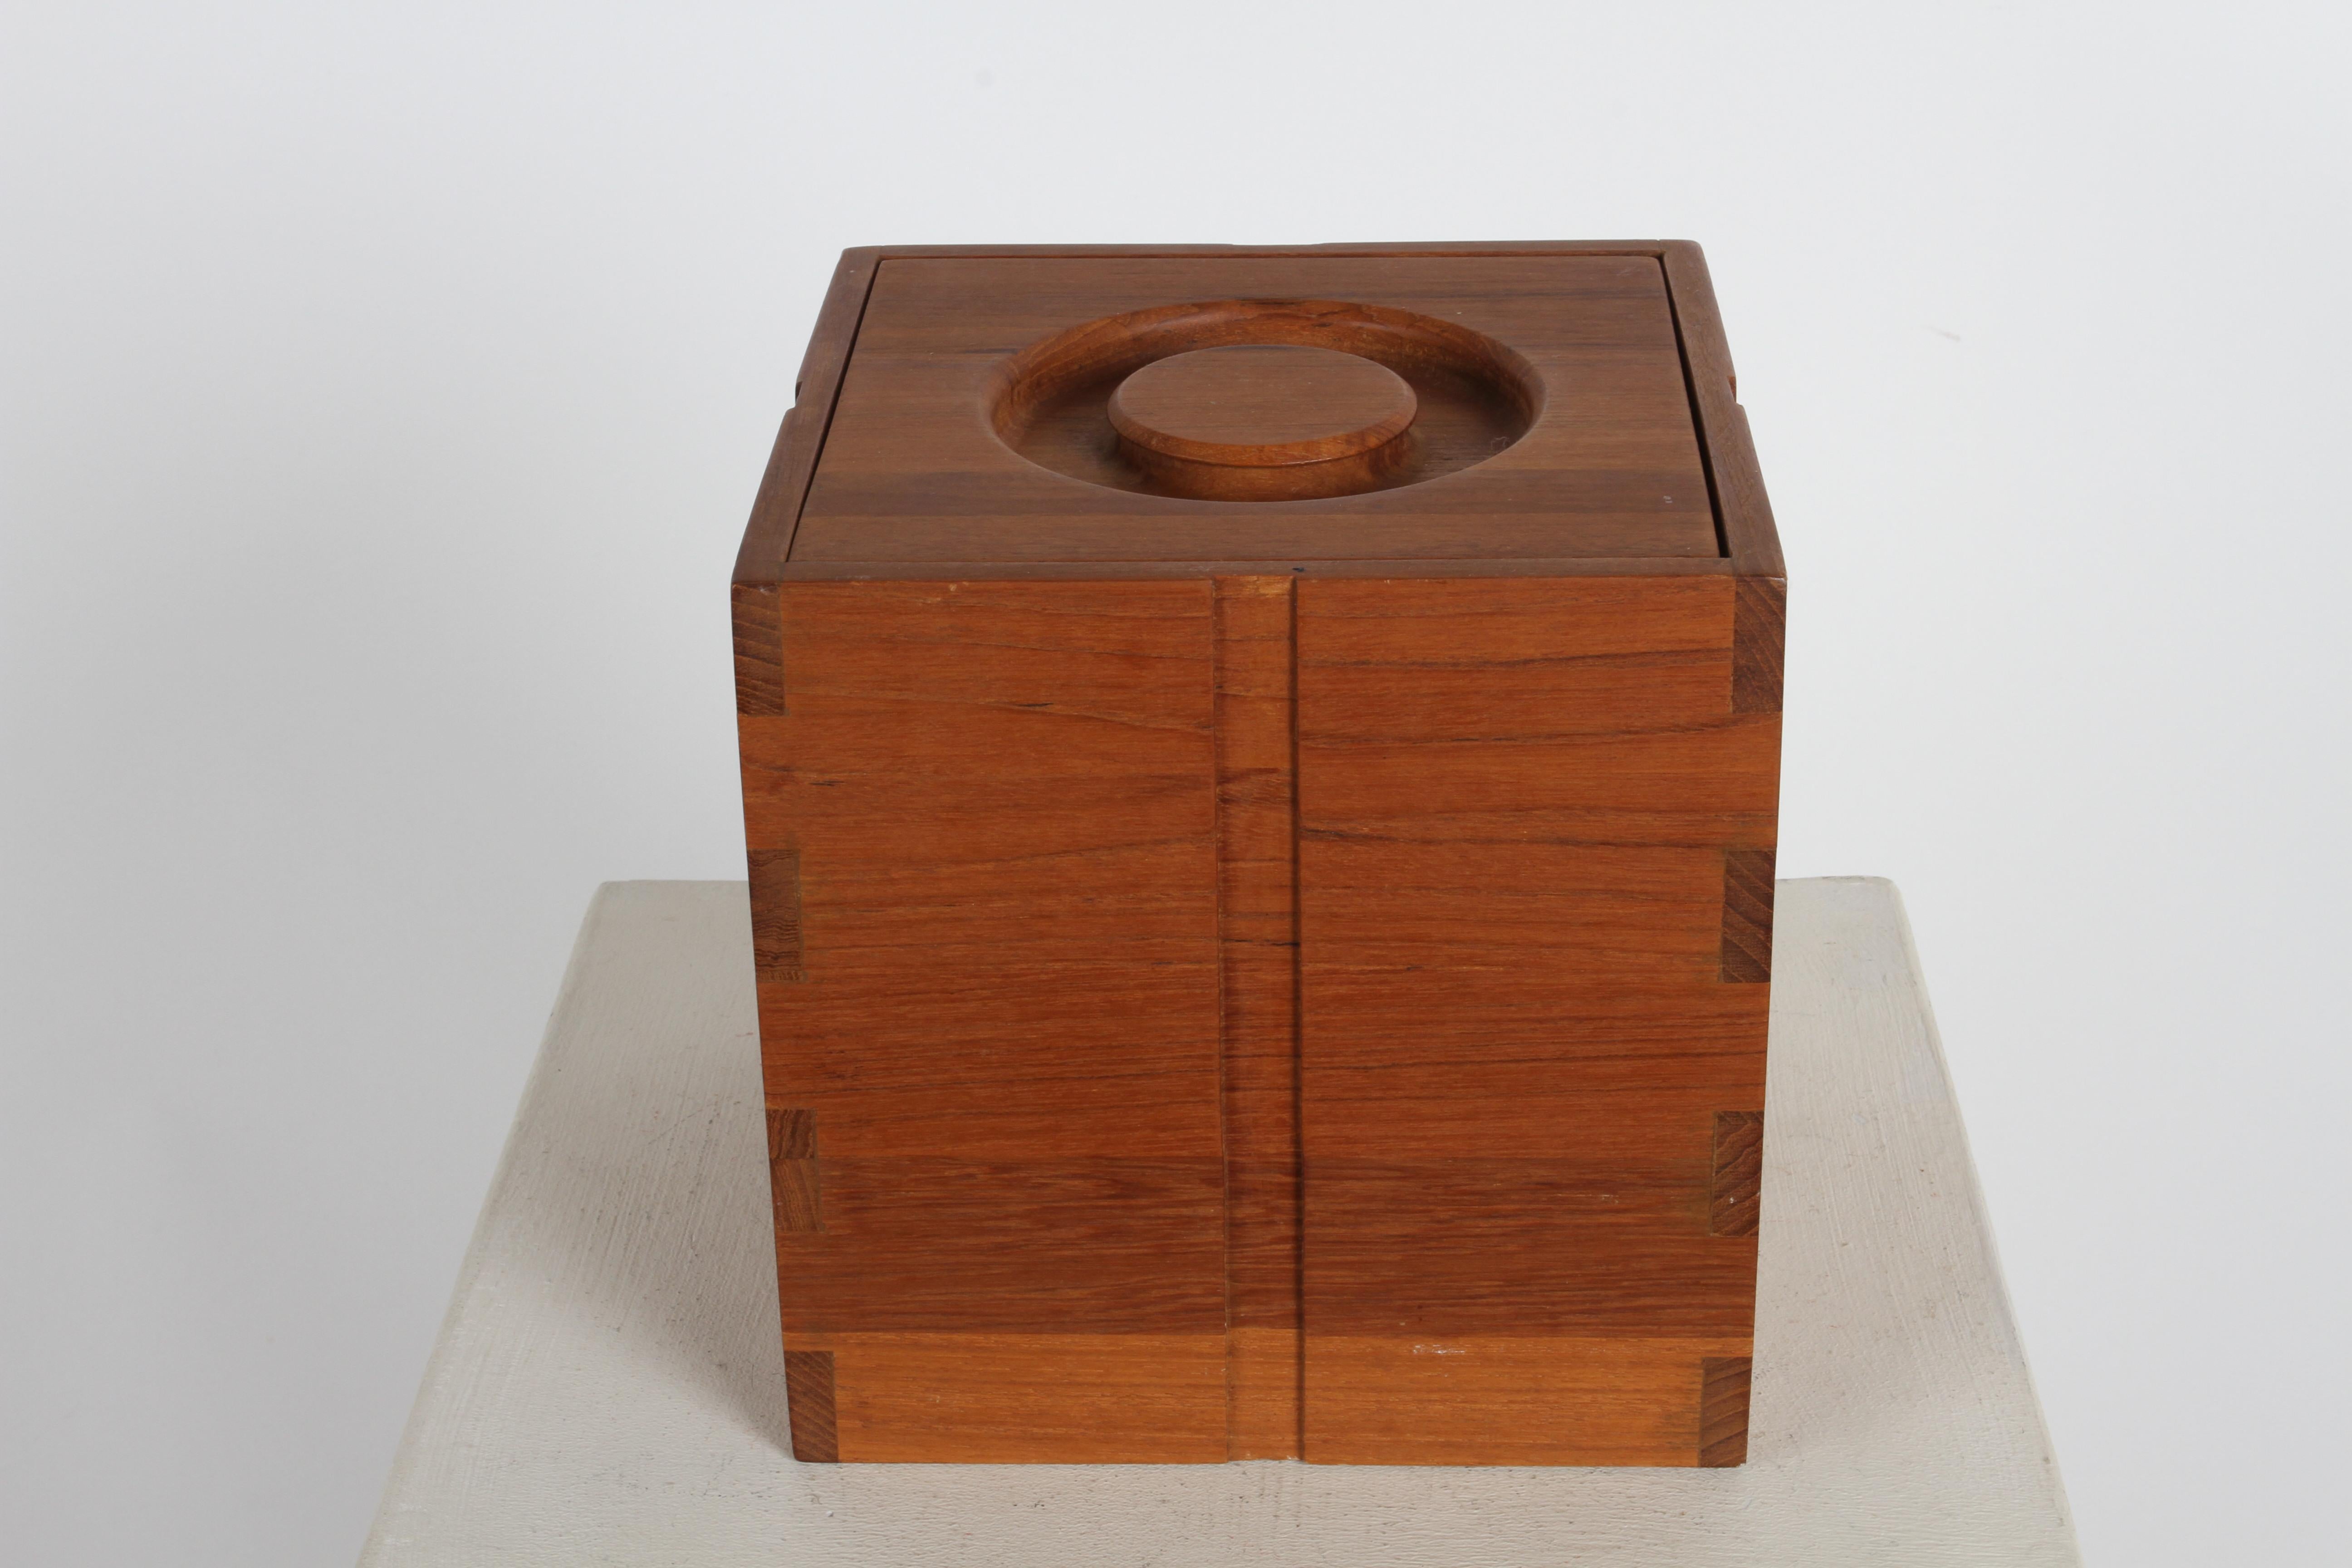 1970s Kalmar Designs Teak Wood Ice Bucket with Thongs - Danish Modern Style - In Good Condition For Sale In St. Louis, MO